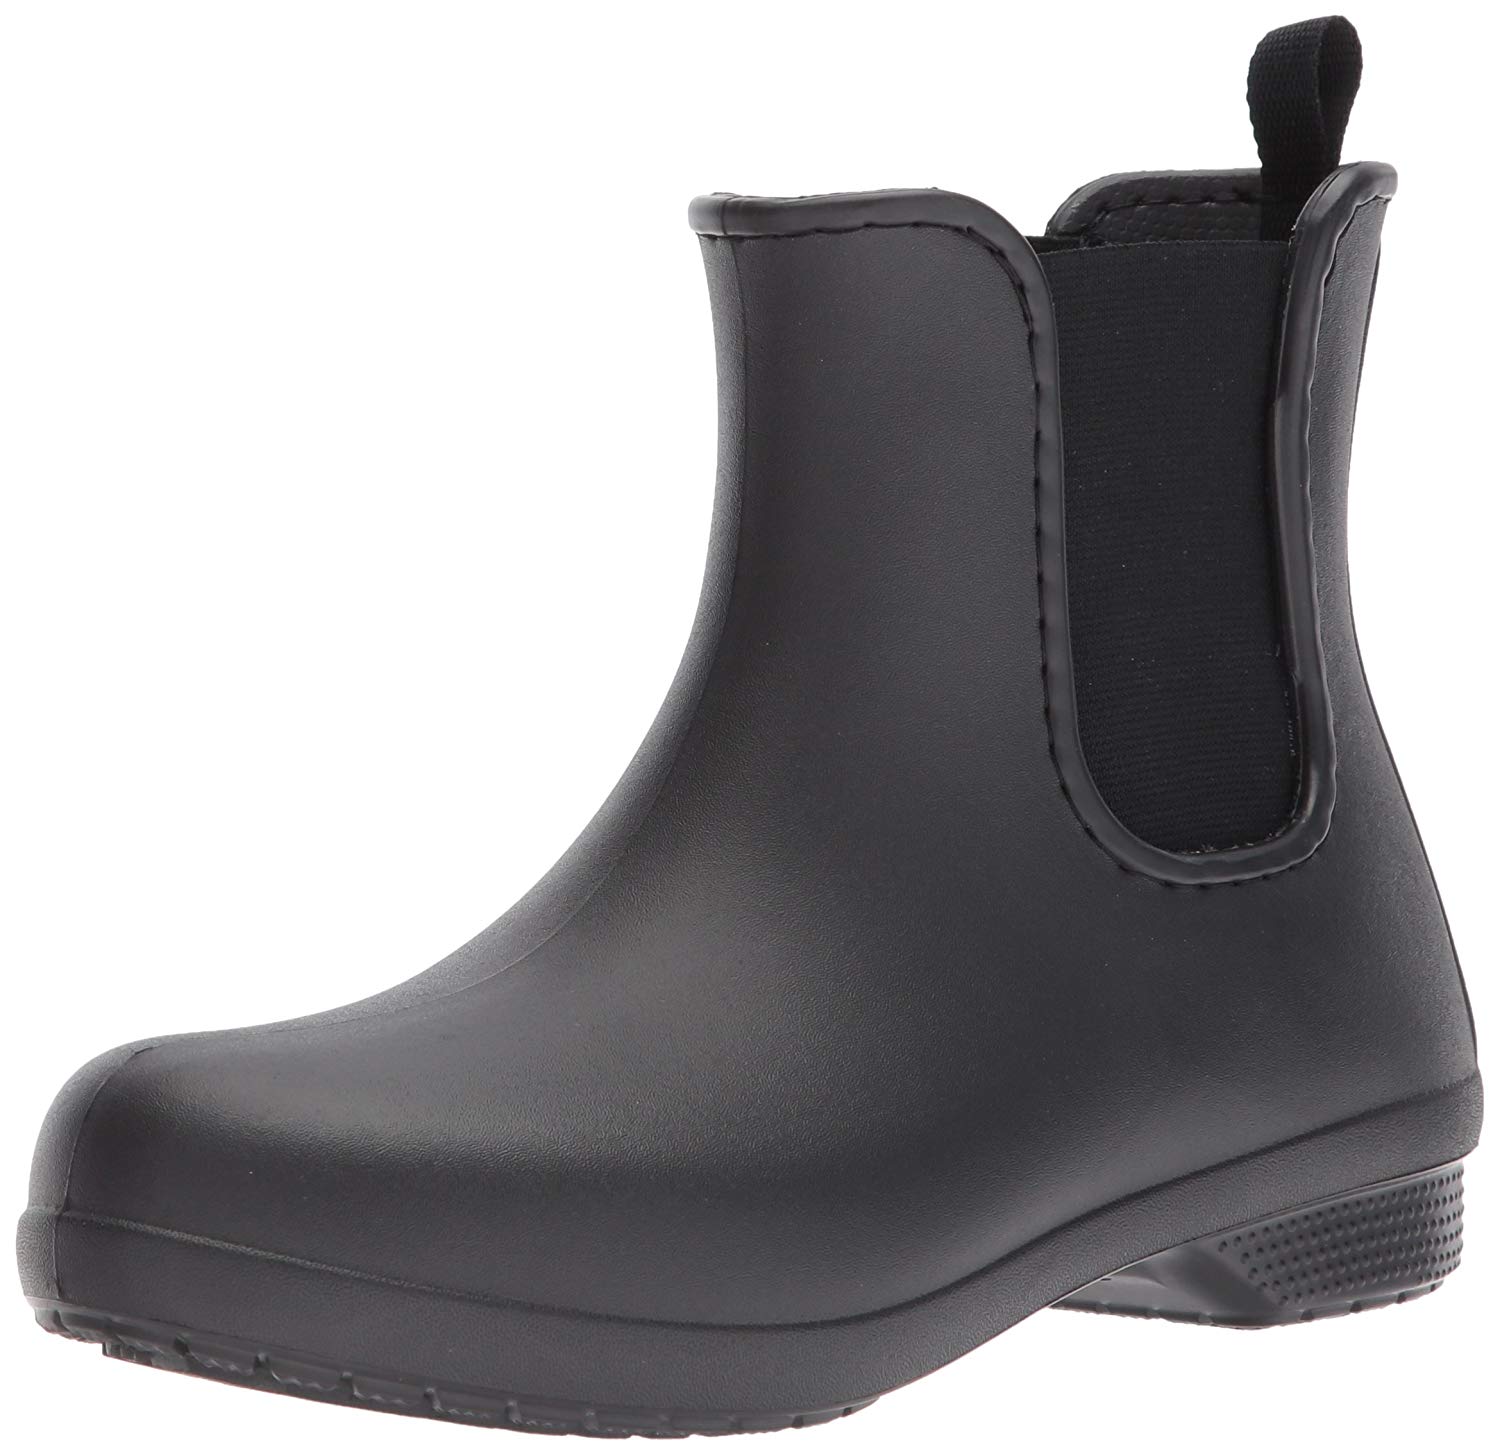 Crocs Womens Freesail Round Toe Ankle Chelsea Boots, Black/Black, Size ...